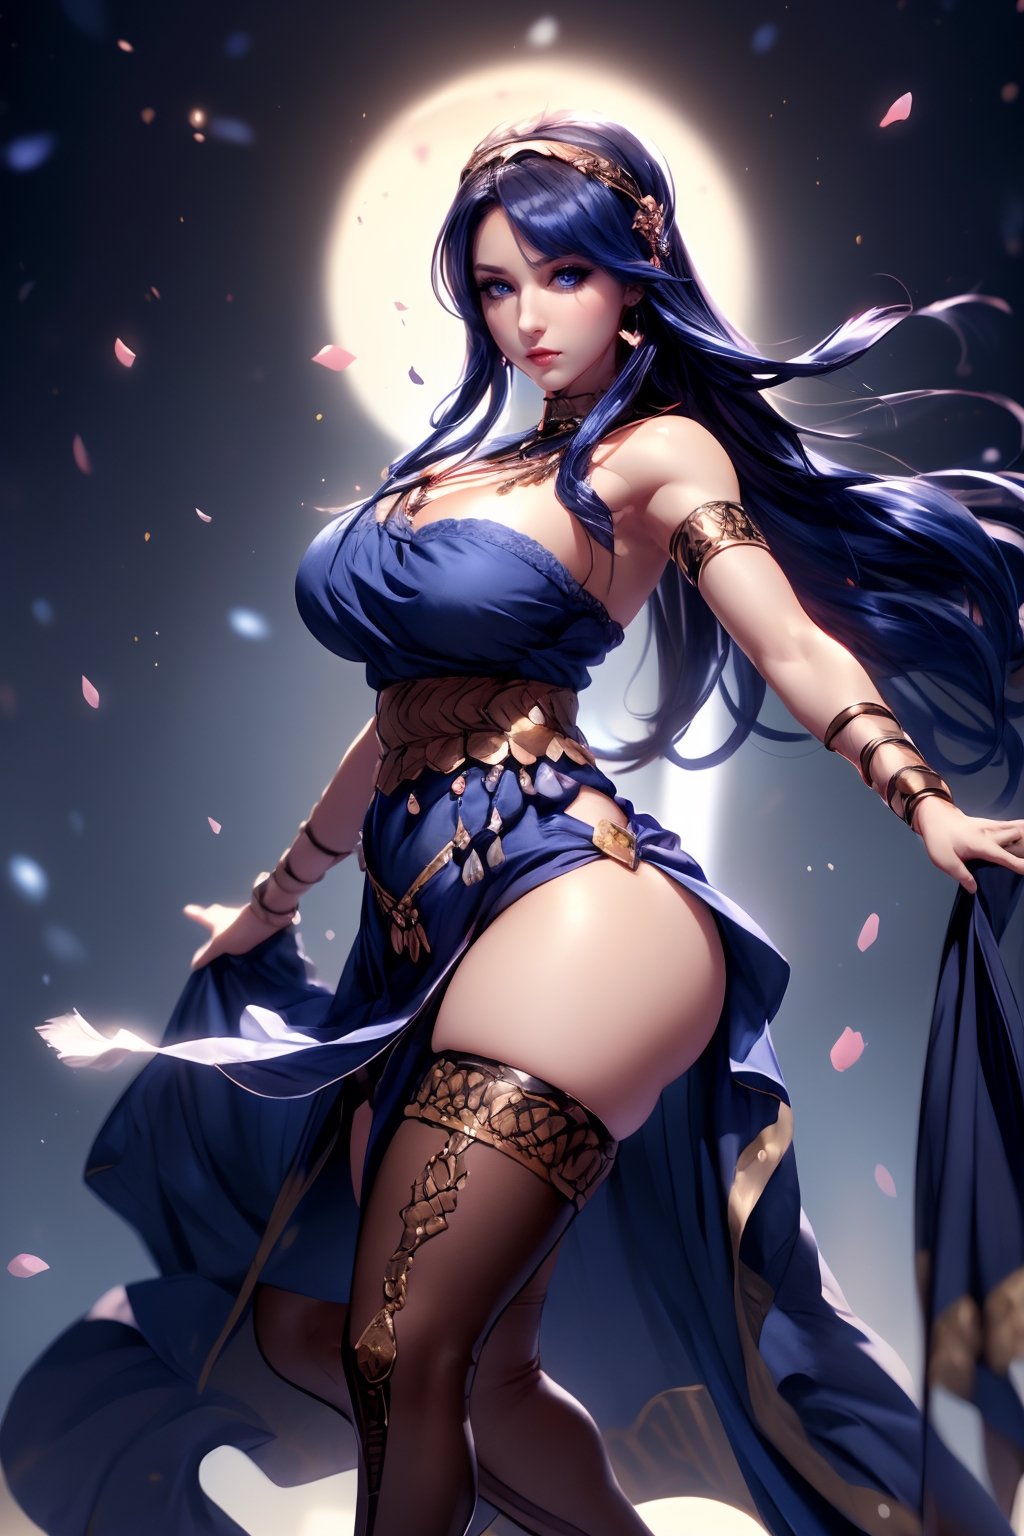 ((1 girl, adorable, Cool )), ((,chest sarashi, thighhighs, sash)), (headband,dark blue hair, long hair, blue eyes, makeup), (large breasts, large ass, thighs, wide hips, abs, voloptuous), background sakura,Dancer Outfit 